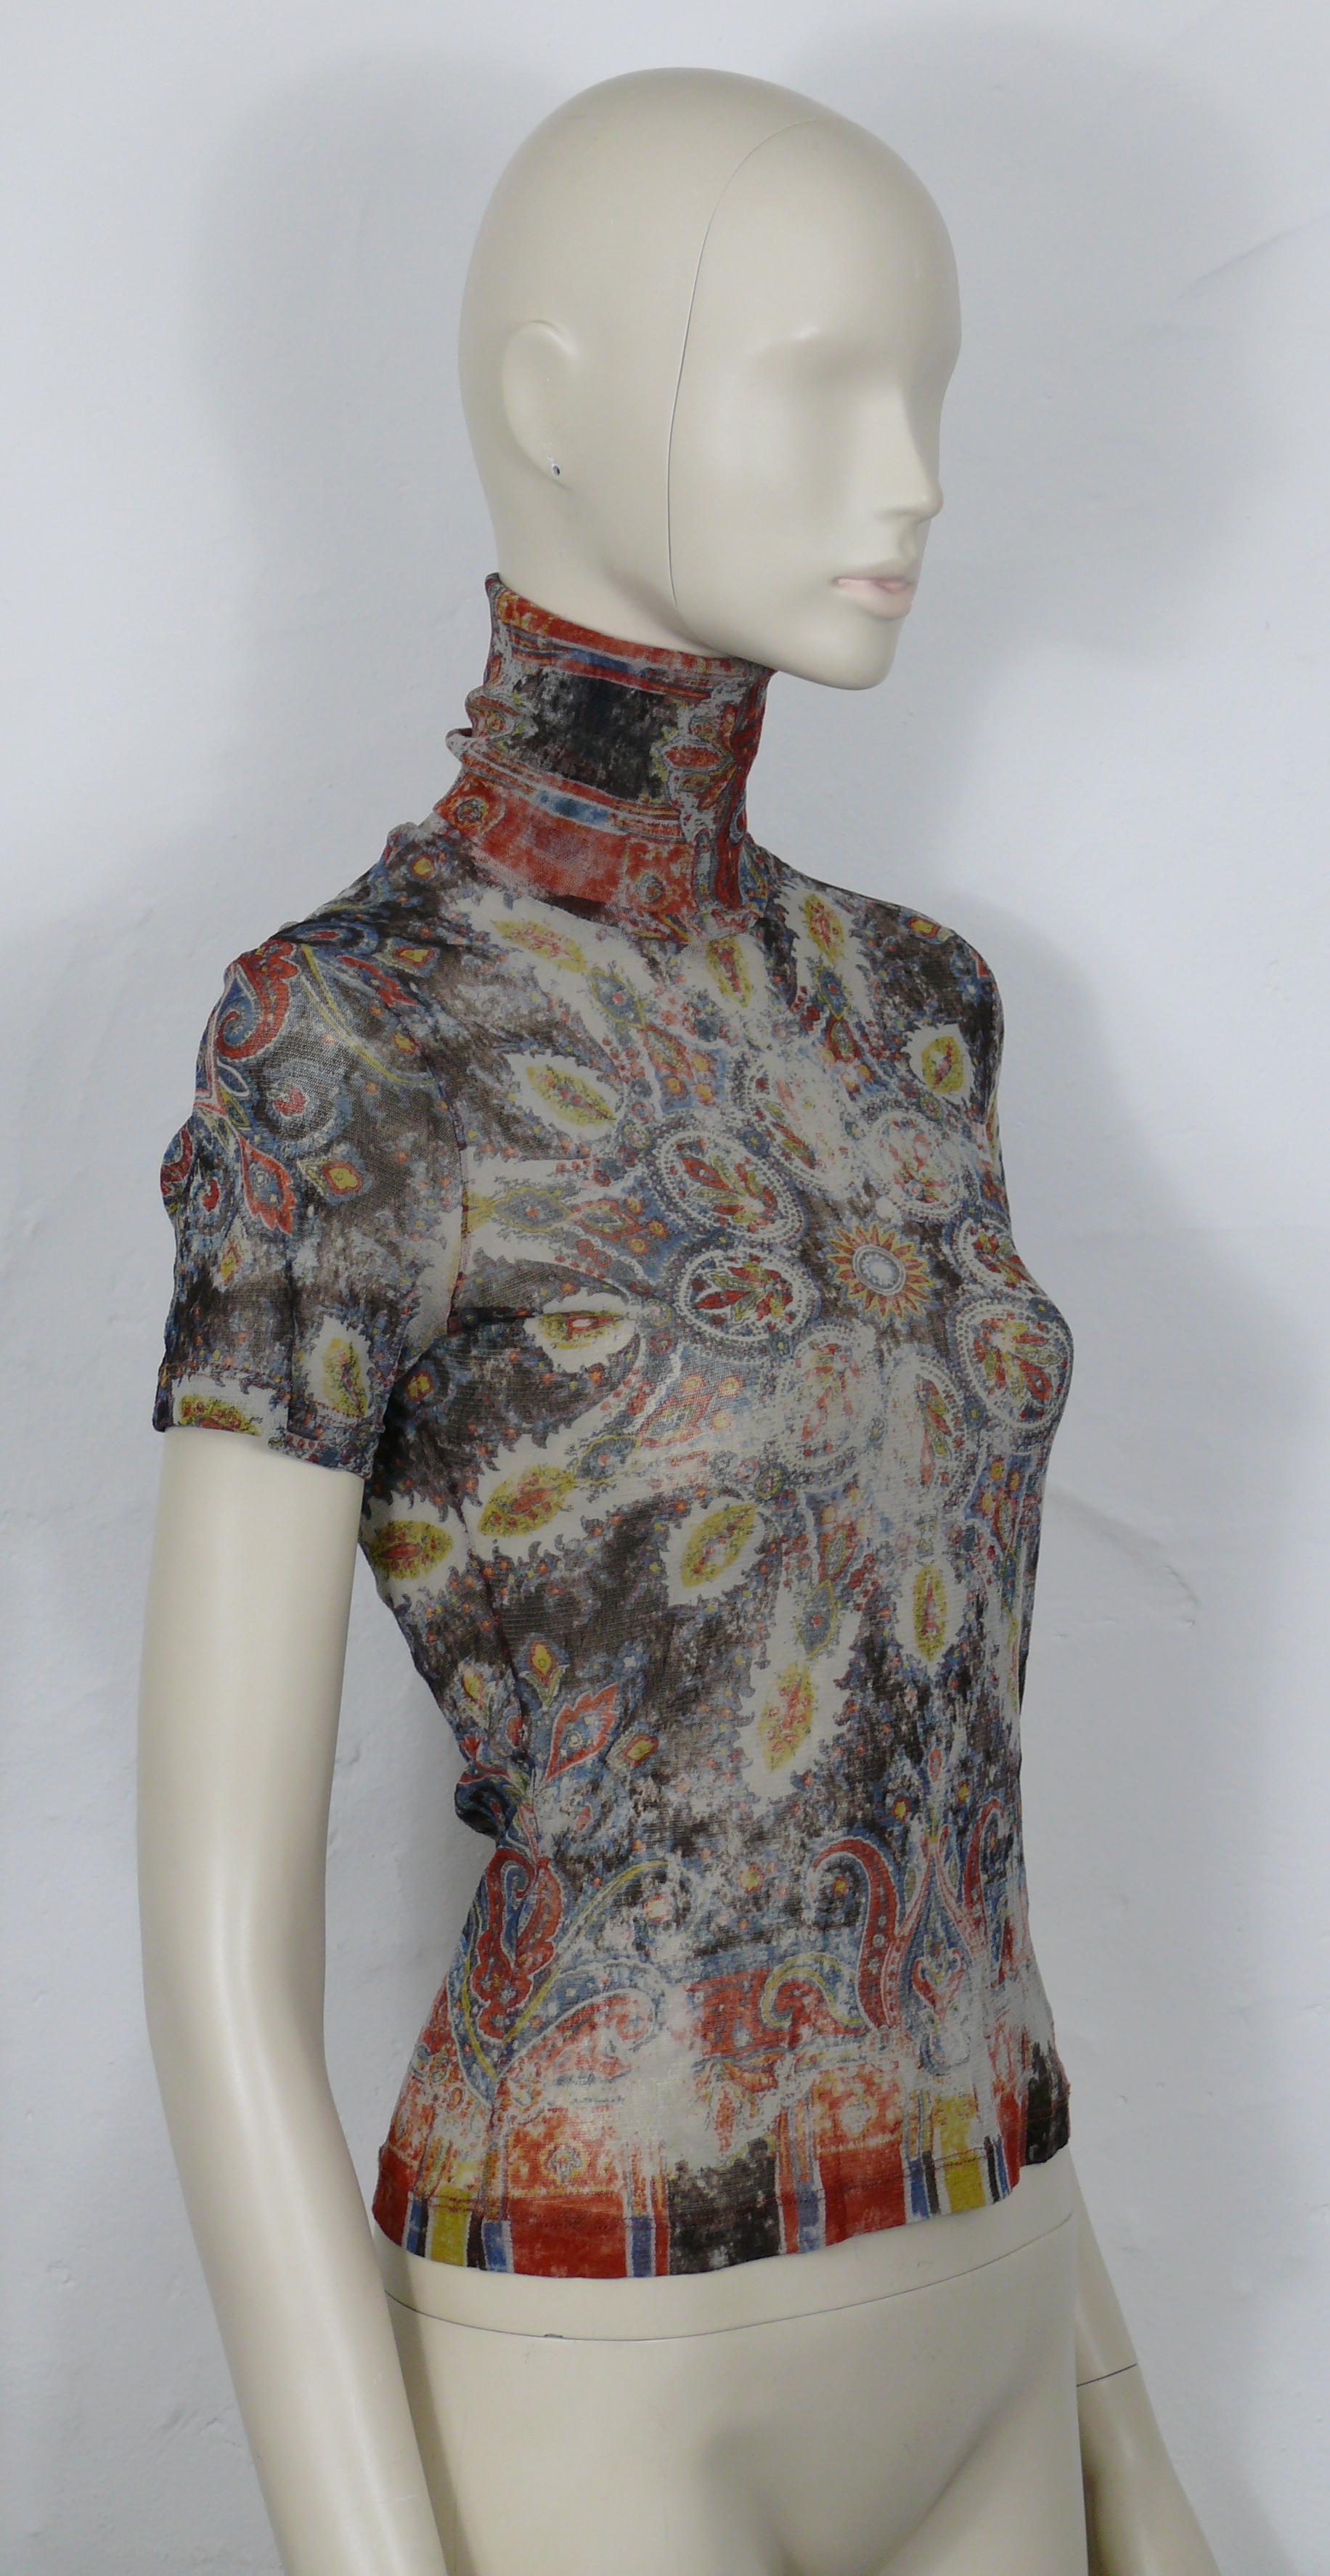 JEAN PAUL GAULTIER vintage distressed carpet print sheer mesh turtleneck top.

Label reads JPG JEAN'S Collection N°0008.

Missing composition tag (probably 100% Nylon).

Missing size tag.
Please refer to measurements.

Indicative measurements taken